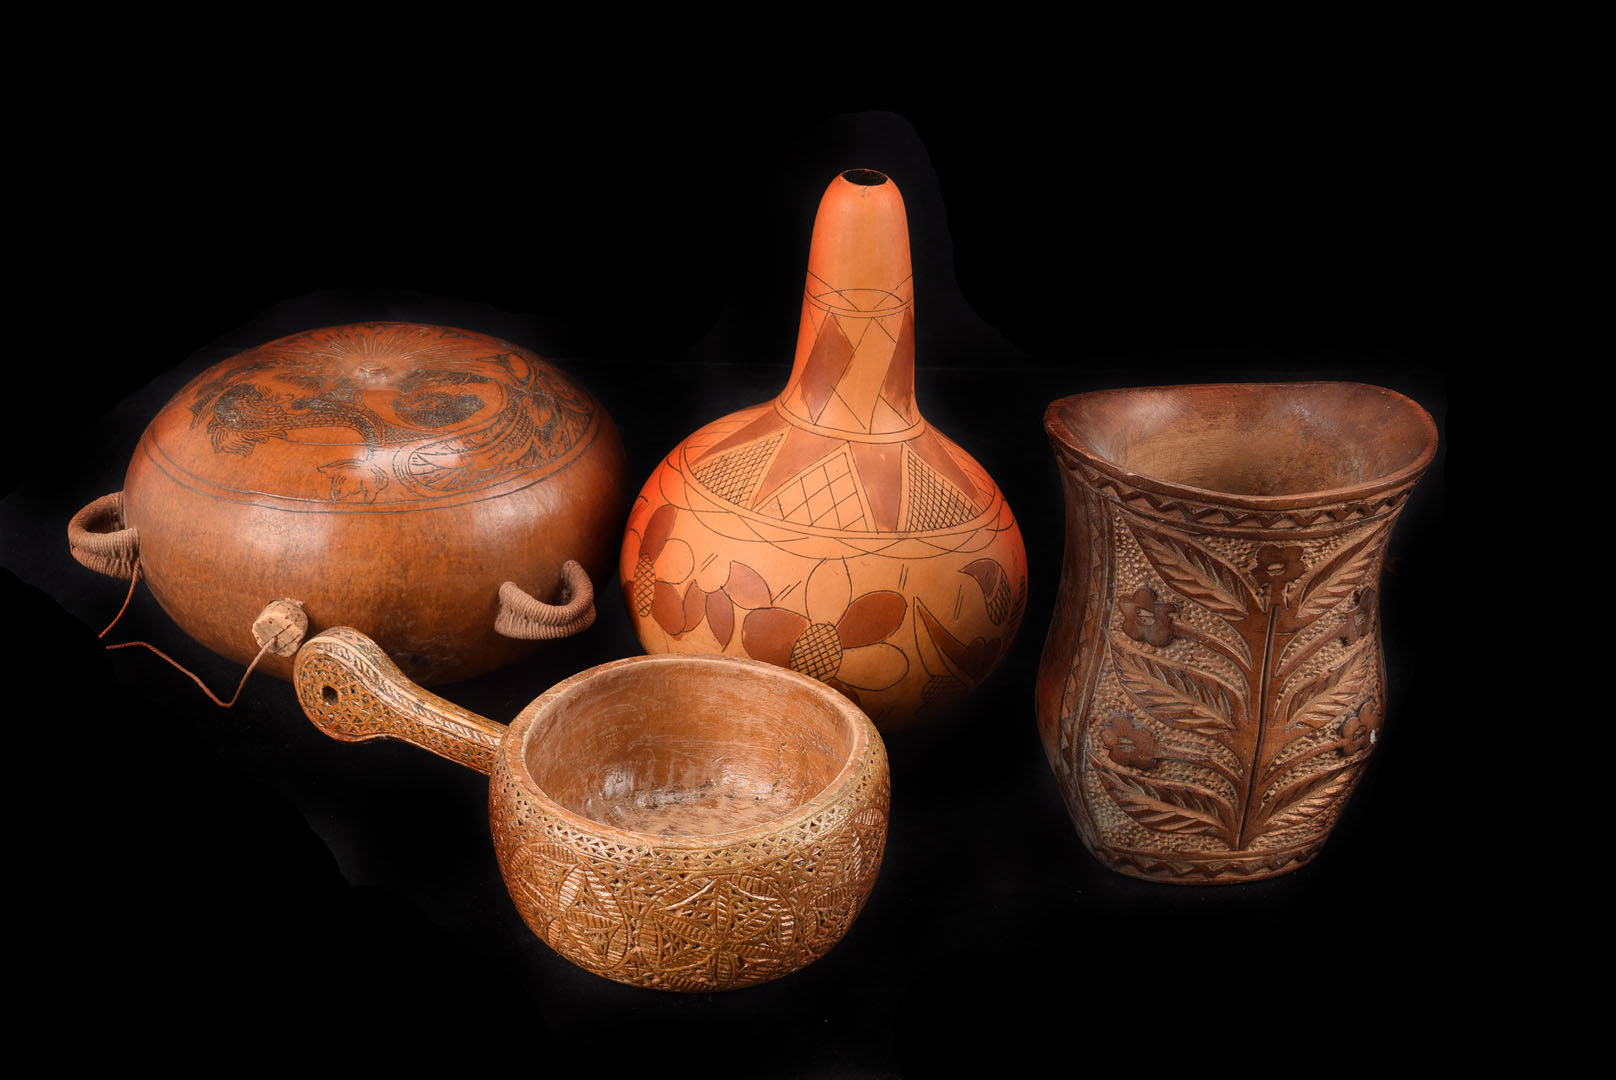 A collection of gourds and carved nuts, including a coquilla nut, an engraved gourd, another